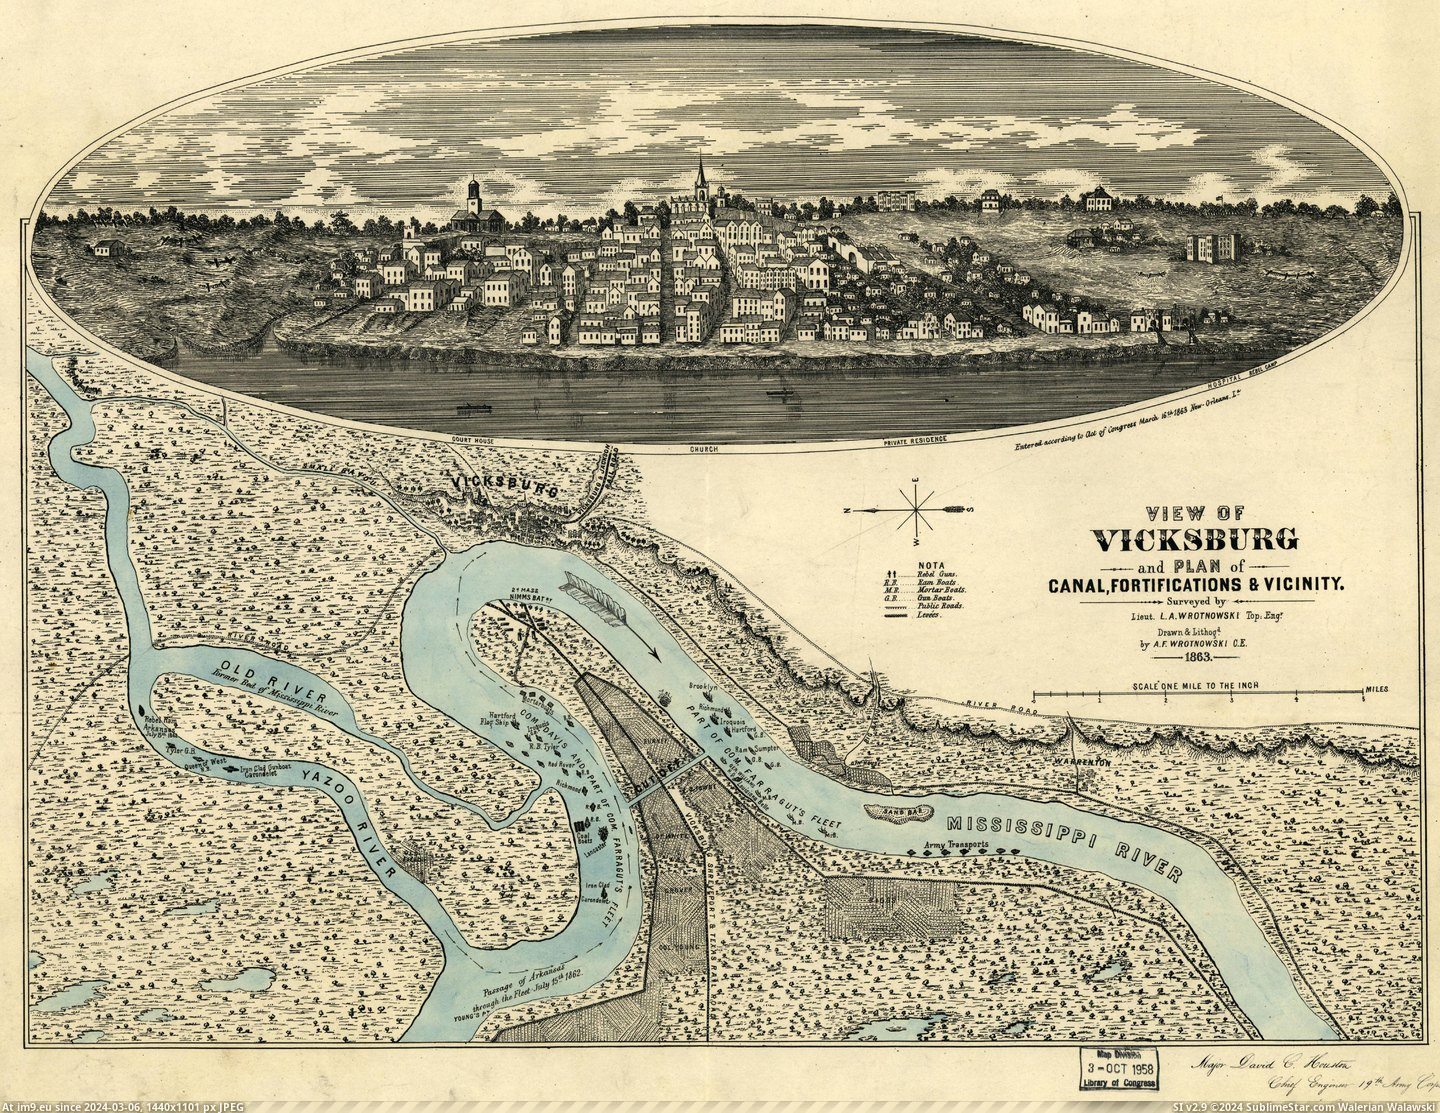 #Plan #Vicinity #Canal [Mapporn] View of Vicksburg and plan of the canal, fortifications and vicinity, L.A. Wrotnowski, 1863. [6552x5024] Pic. (Изображение из альбом My r/MAPS favs))